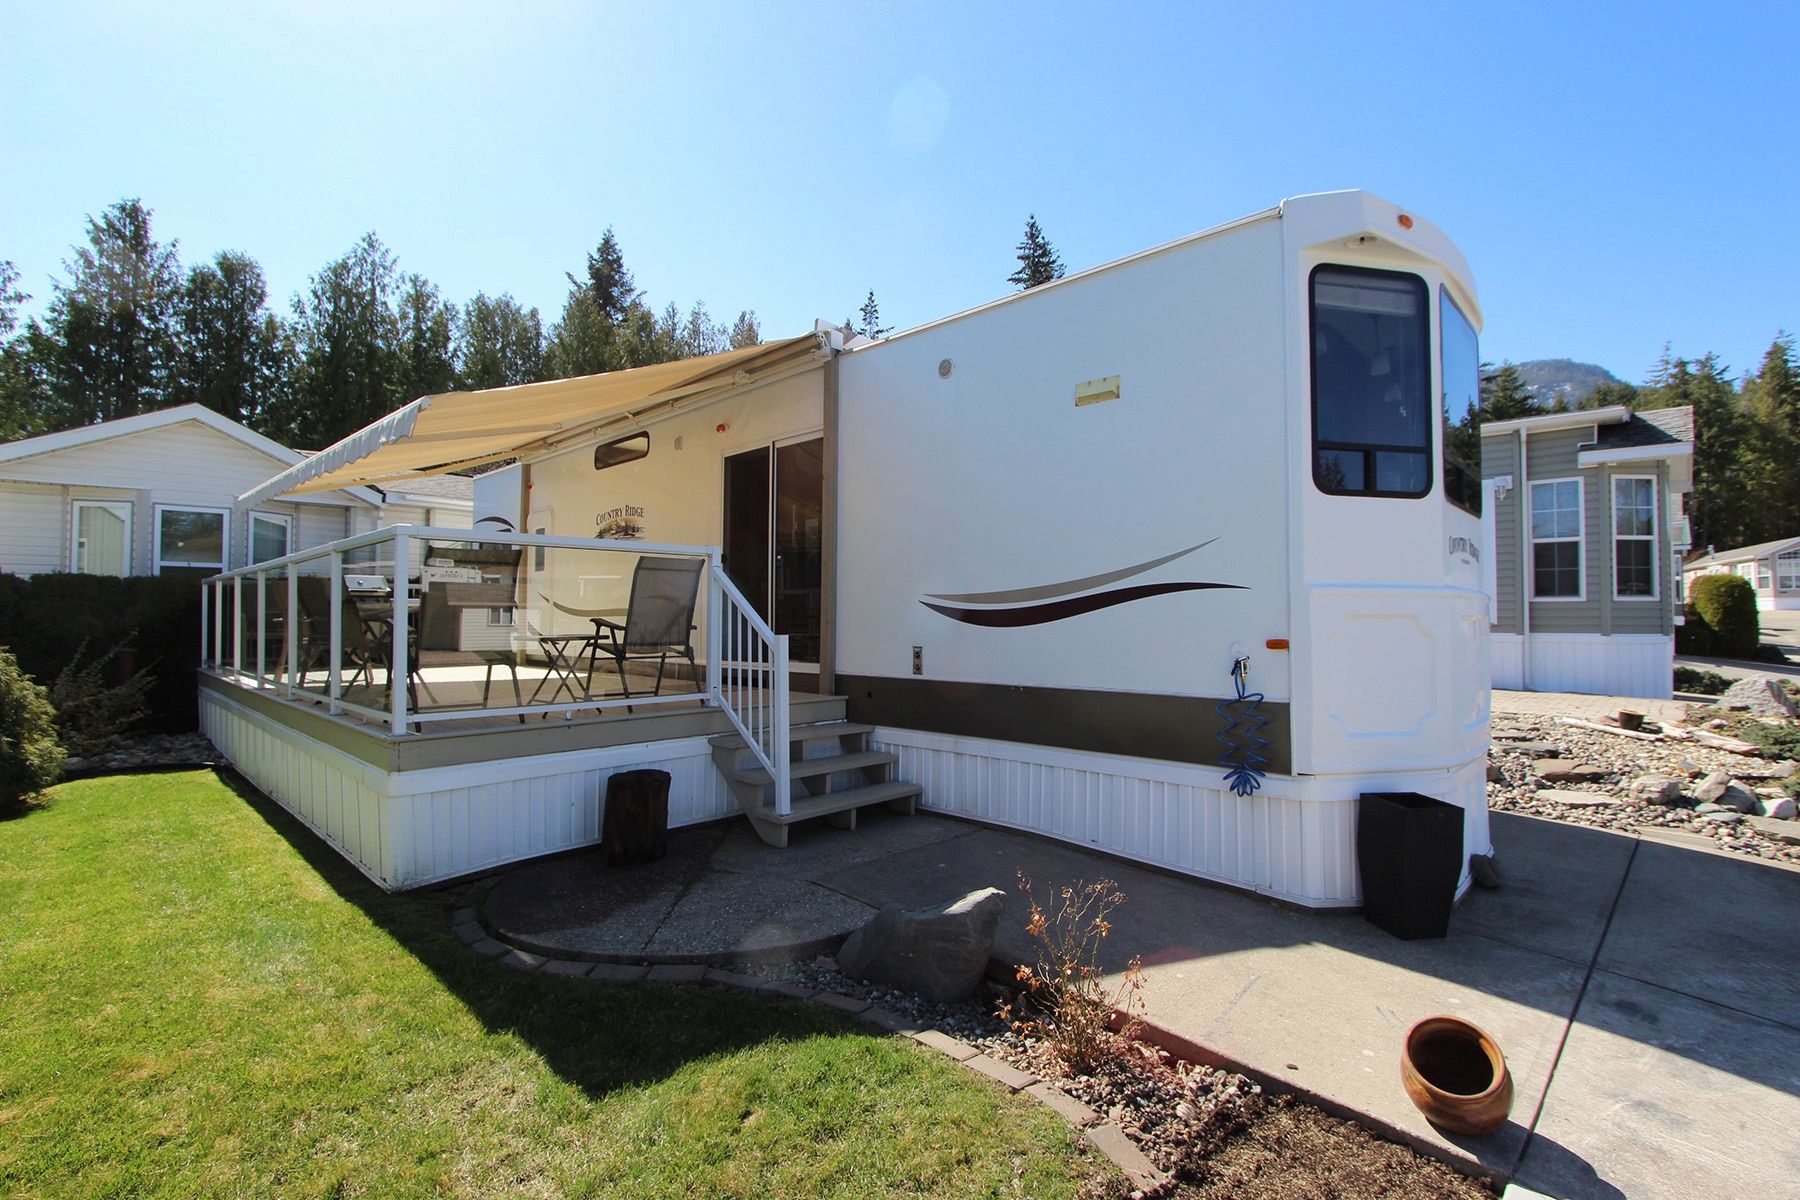 Main Photo: 46 667 Waverly Park Frontage Road in : Sorrento Recreational for sale (South Shuswap)  : MLS®# 10238997